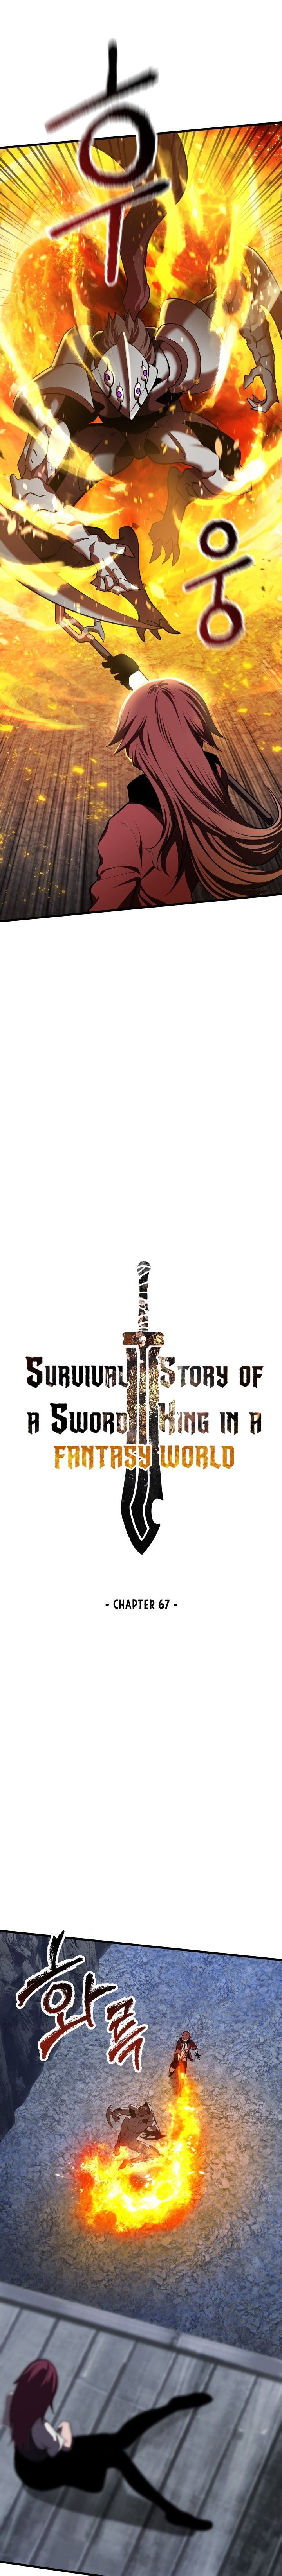 Survival Story Of A Sword King In A Fantasy World 67 7